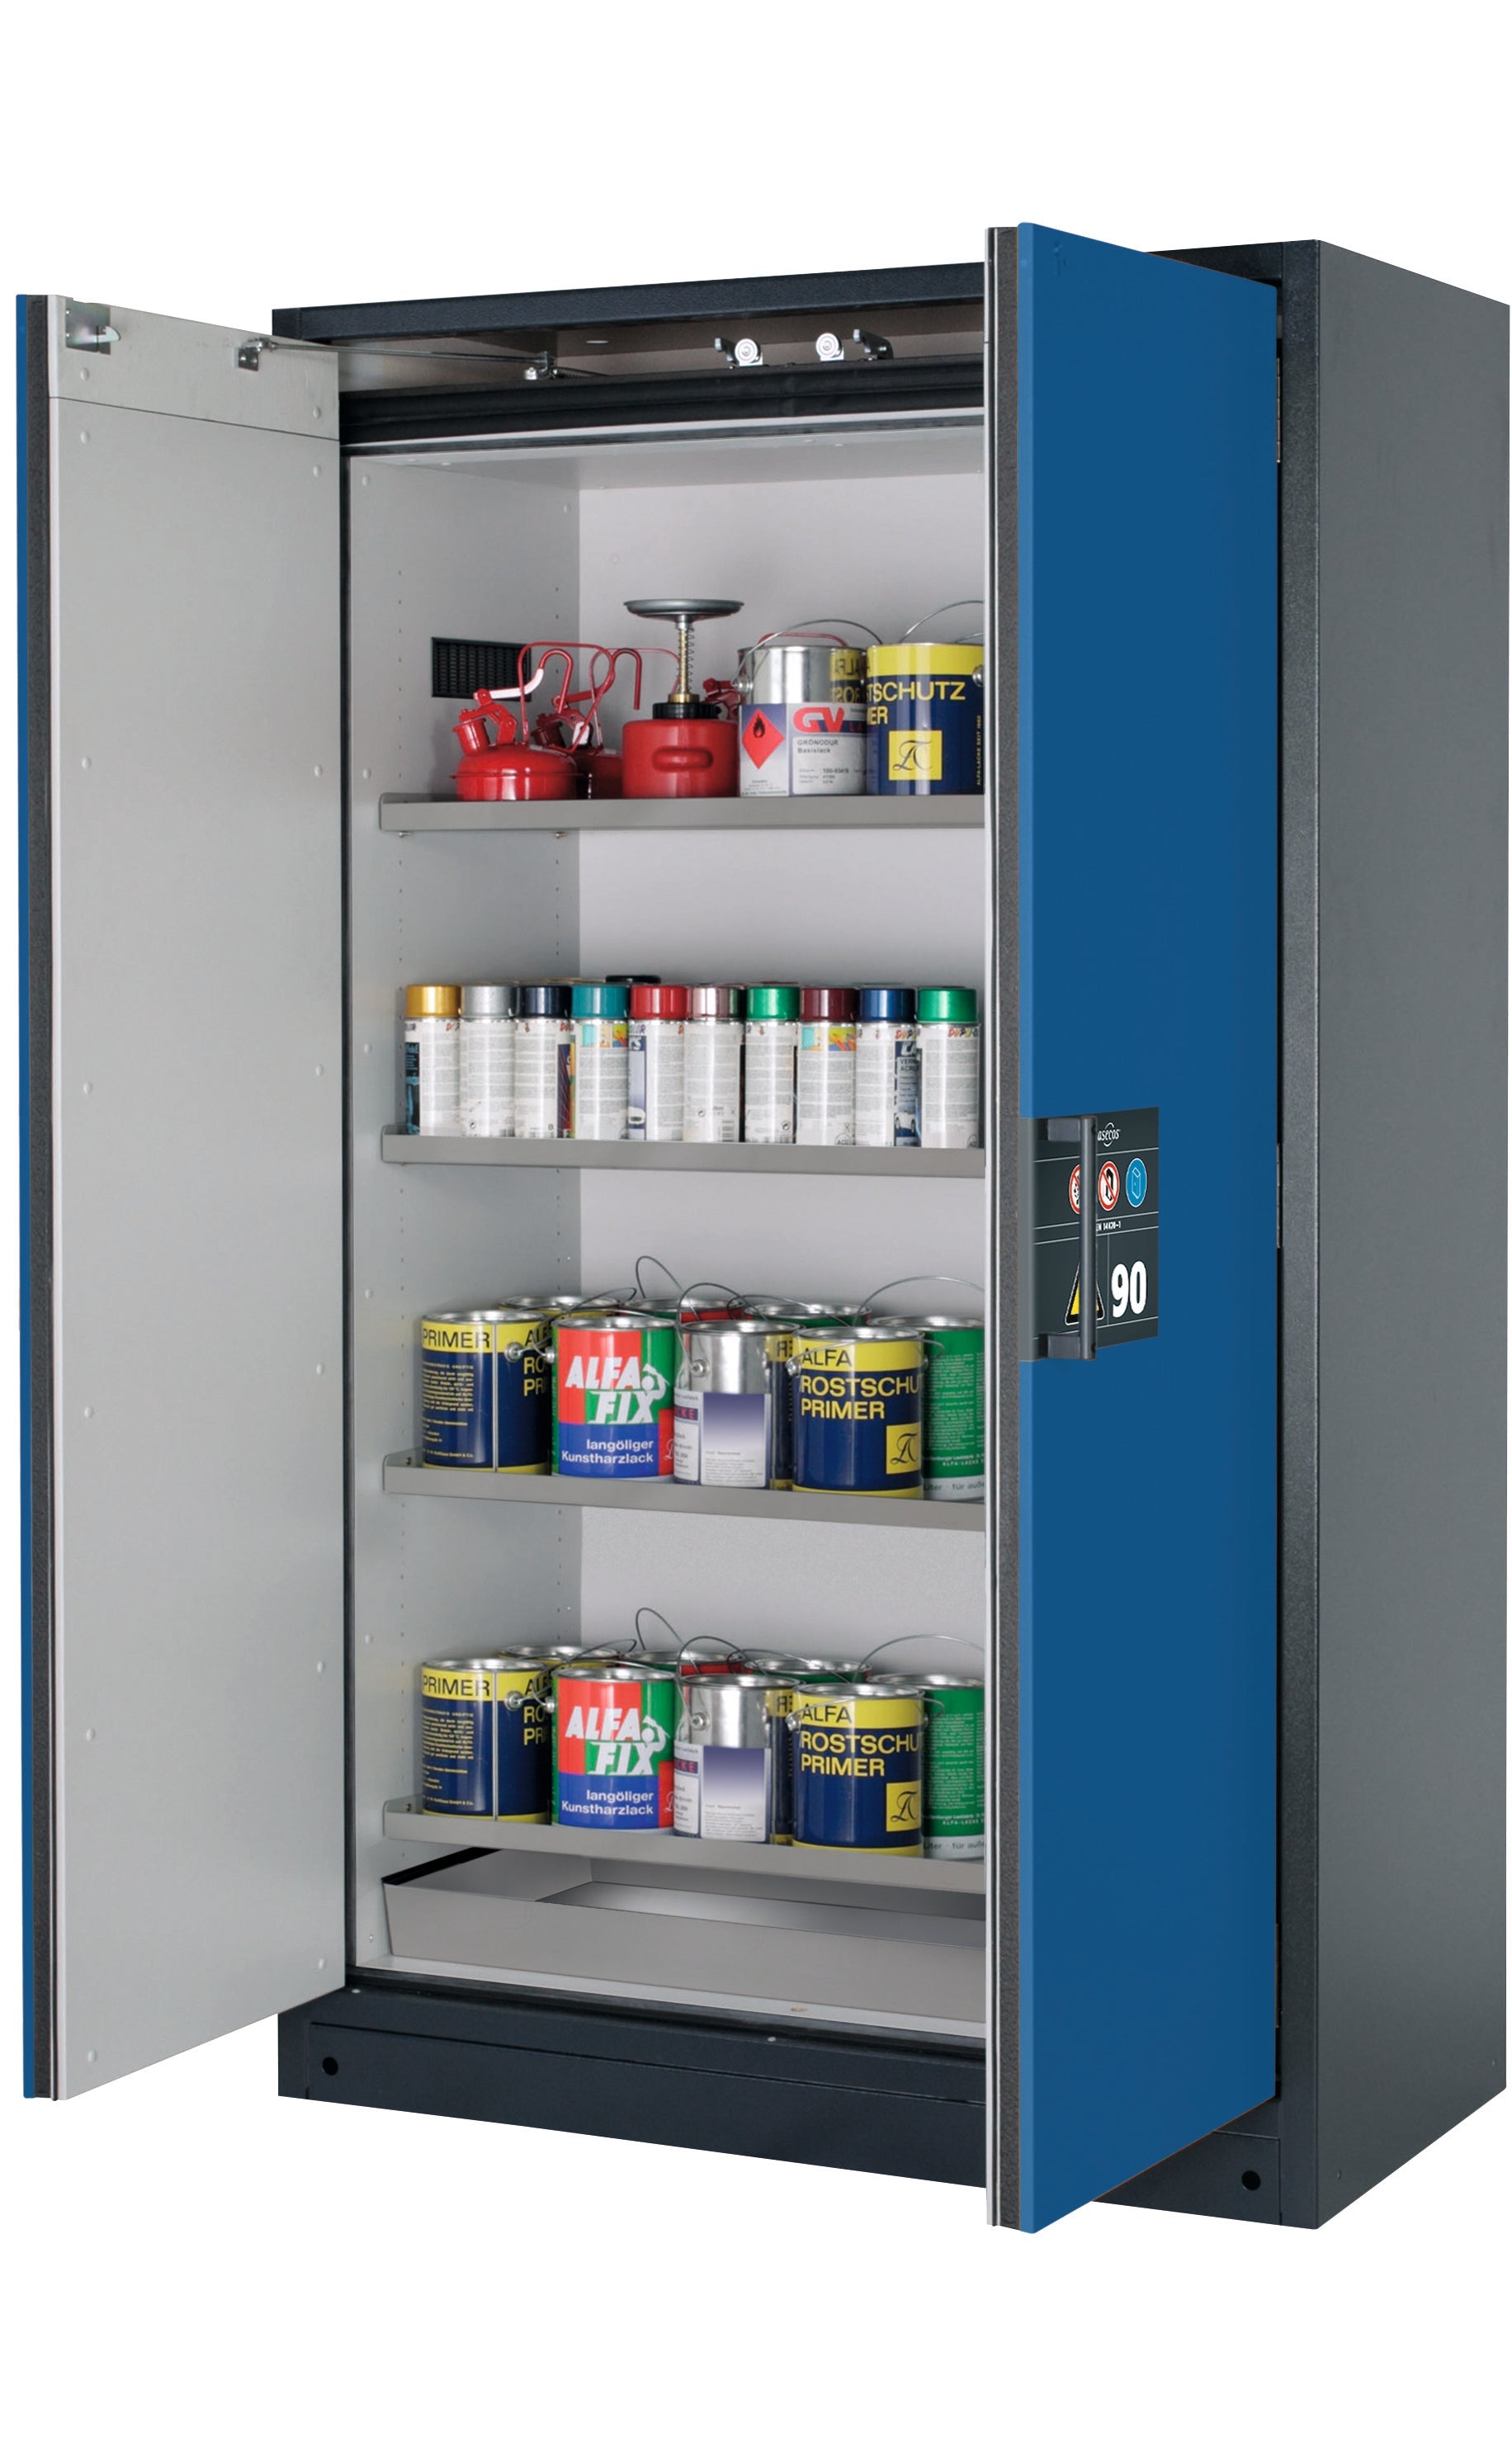 Type 90 safety storage cabinet Q-CLASSIC-90 model Q90.195.120 in gentian blue RAL 5010 with 4x shelf standard (stainless steel 1.4301),